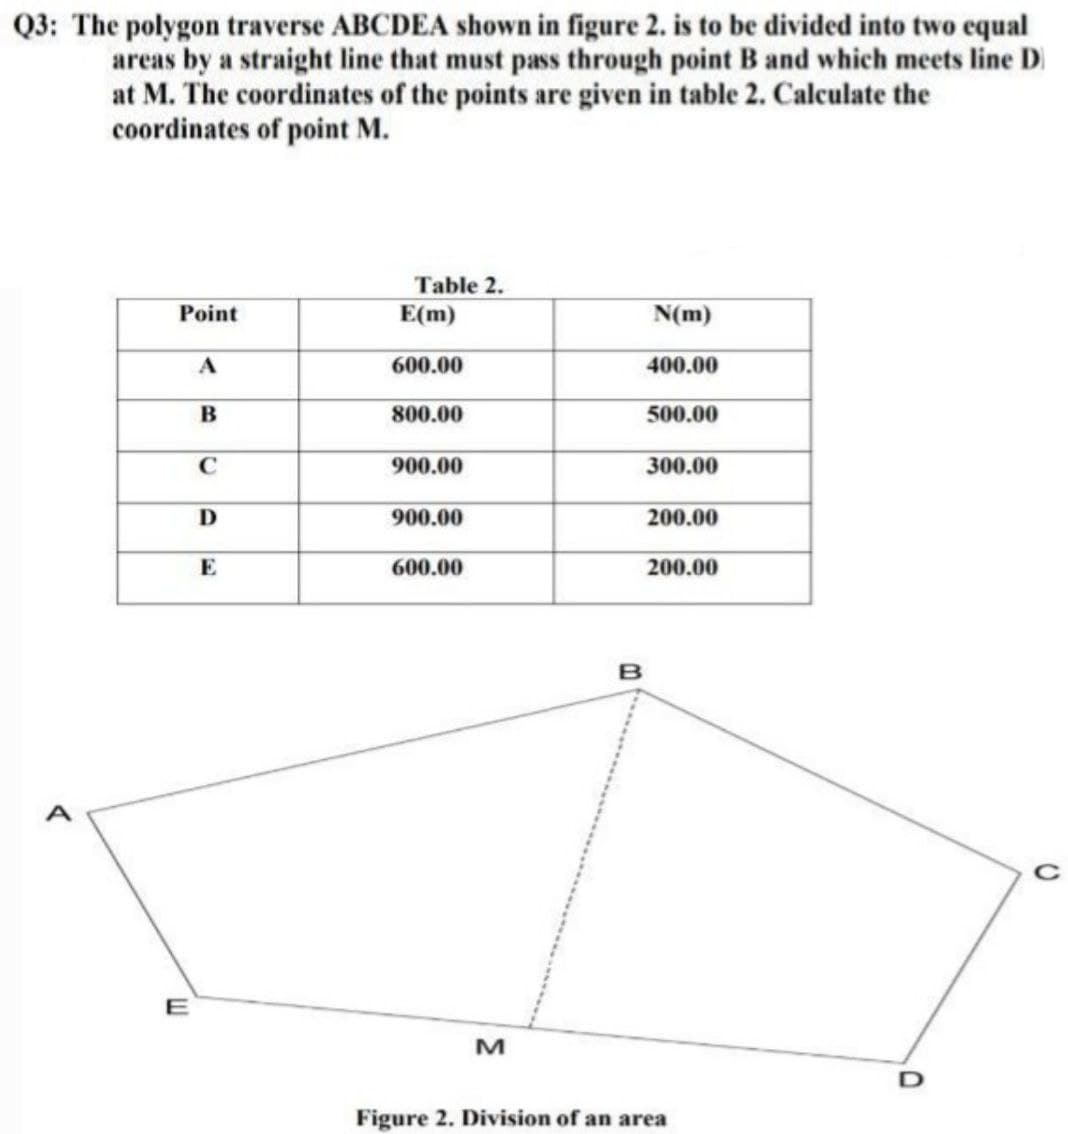 Q3: The polygon traverse ABCDEA shown in figure 2. is to be divided into two equal
areas by a straight line that must pass through point B and which meets line D
at M. The coordinates of the points are given in table 2. Calculate the
coordinates of point M.
Table 2.
Point
N(m)
A
400.00
B
500.00
C
300.00
D
200.00
E
200.00
A
E
E(m)
600.00
800.00
900.00
900.00
600.00
B
M
Figure 2. Division of an area
D
C